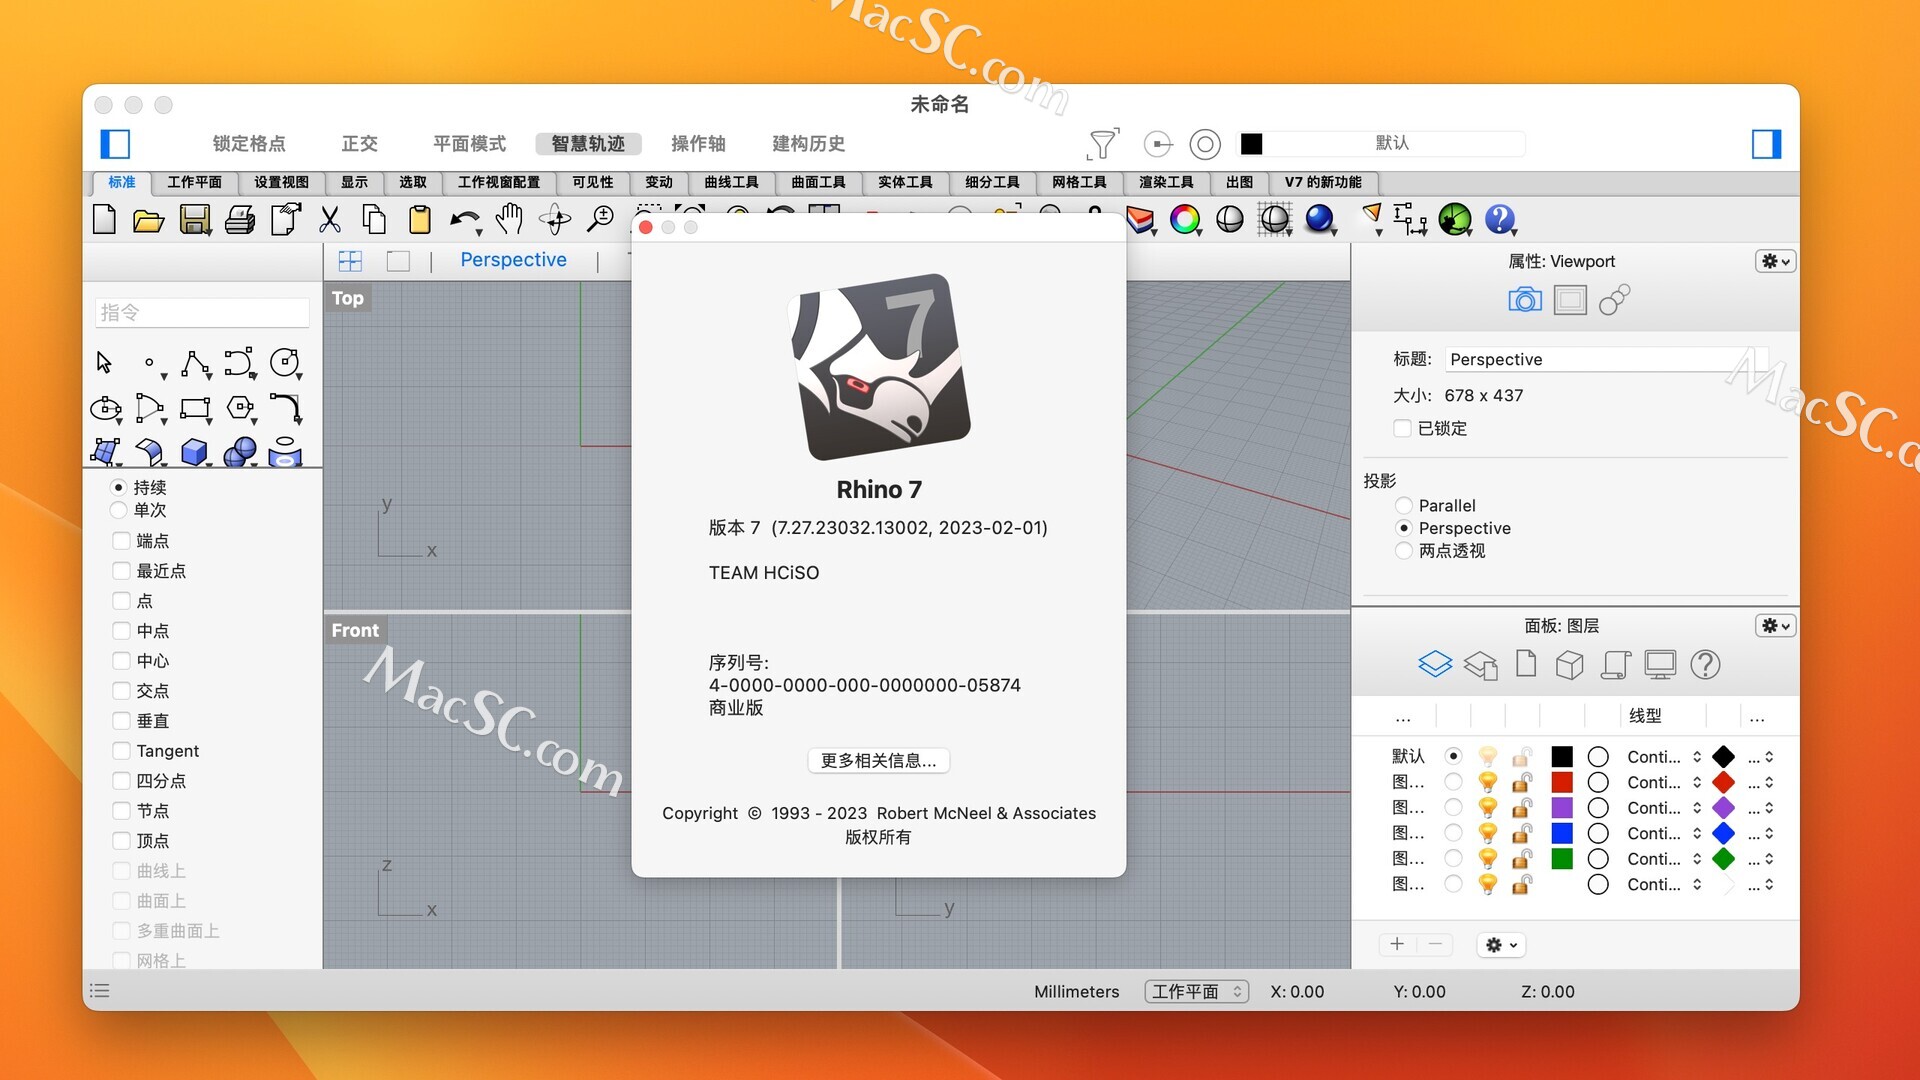 download the last version for apple Rhinoceros 3D 7.30.23163.13001